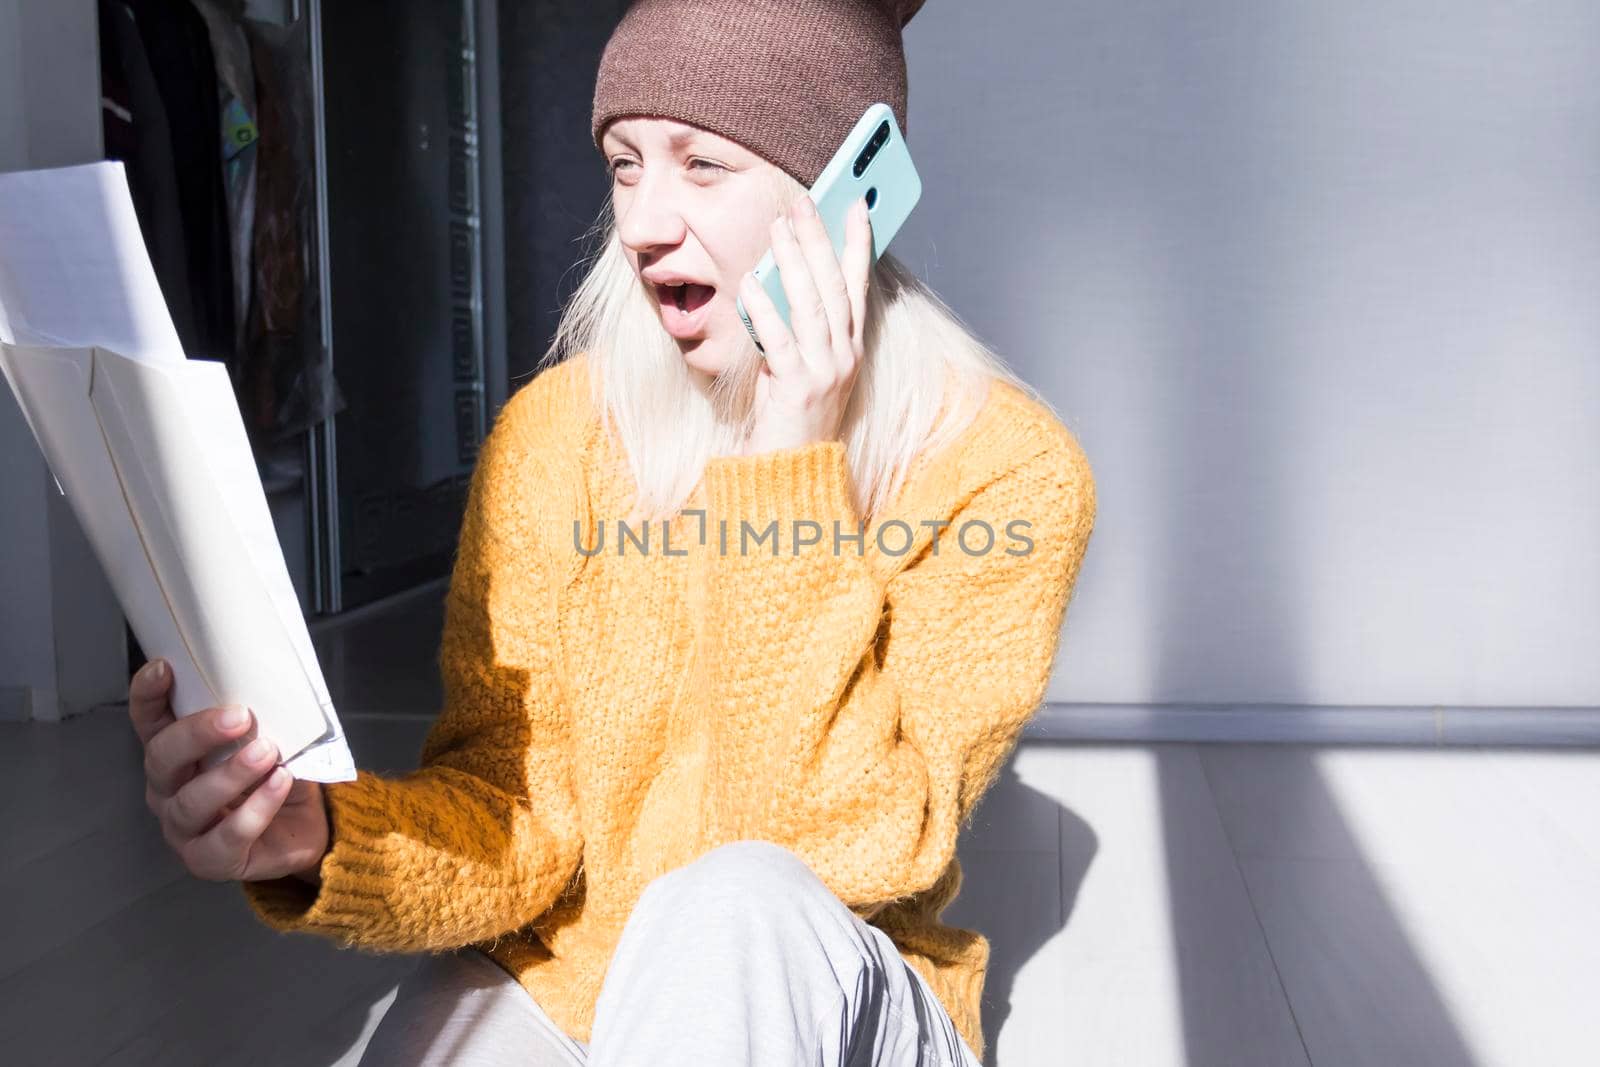 A young girl in a yellow sweater and hat is talking on a mobile phone and studying large bills and utility bills..